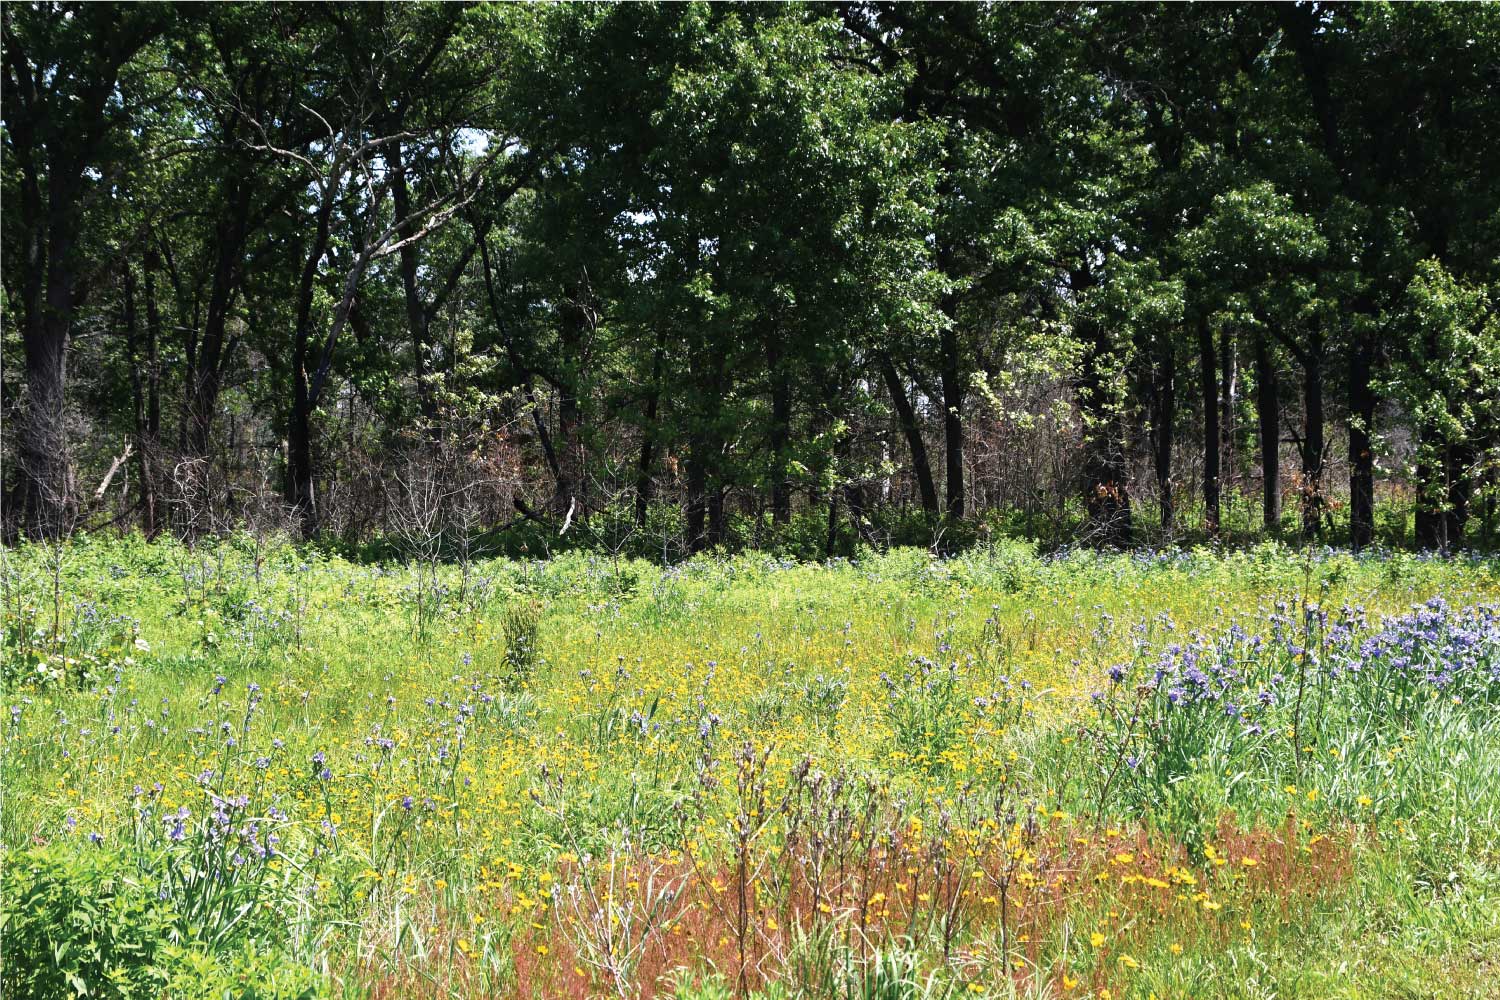 A prairie of grasses and wildflowers with trees in the background.